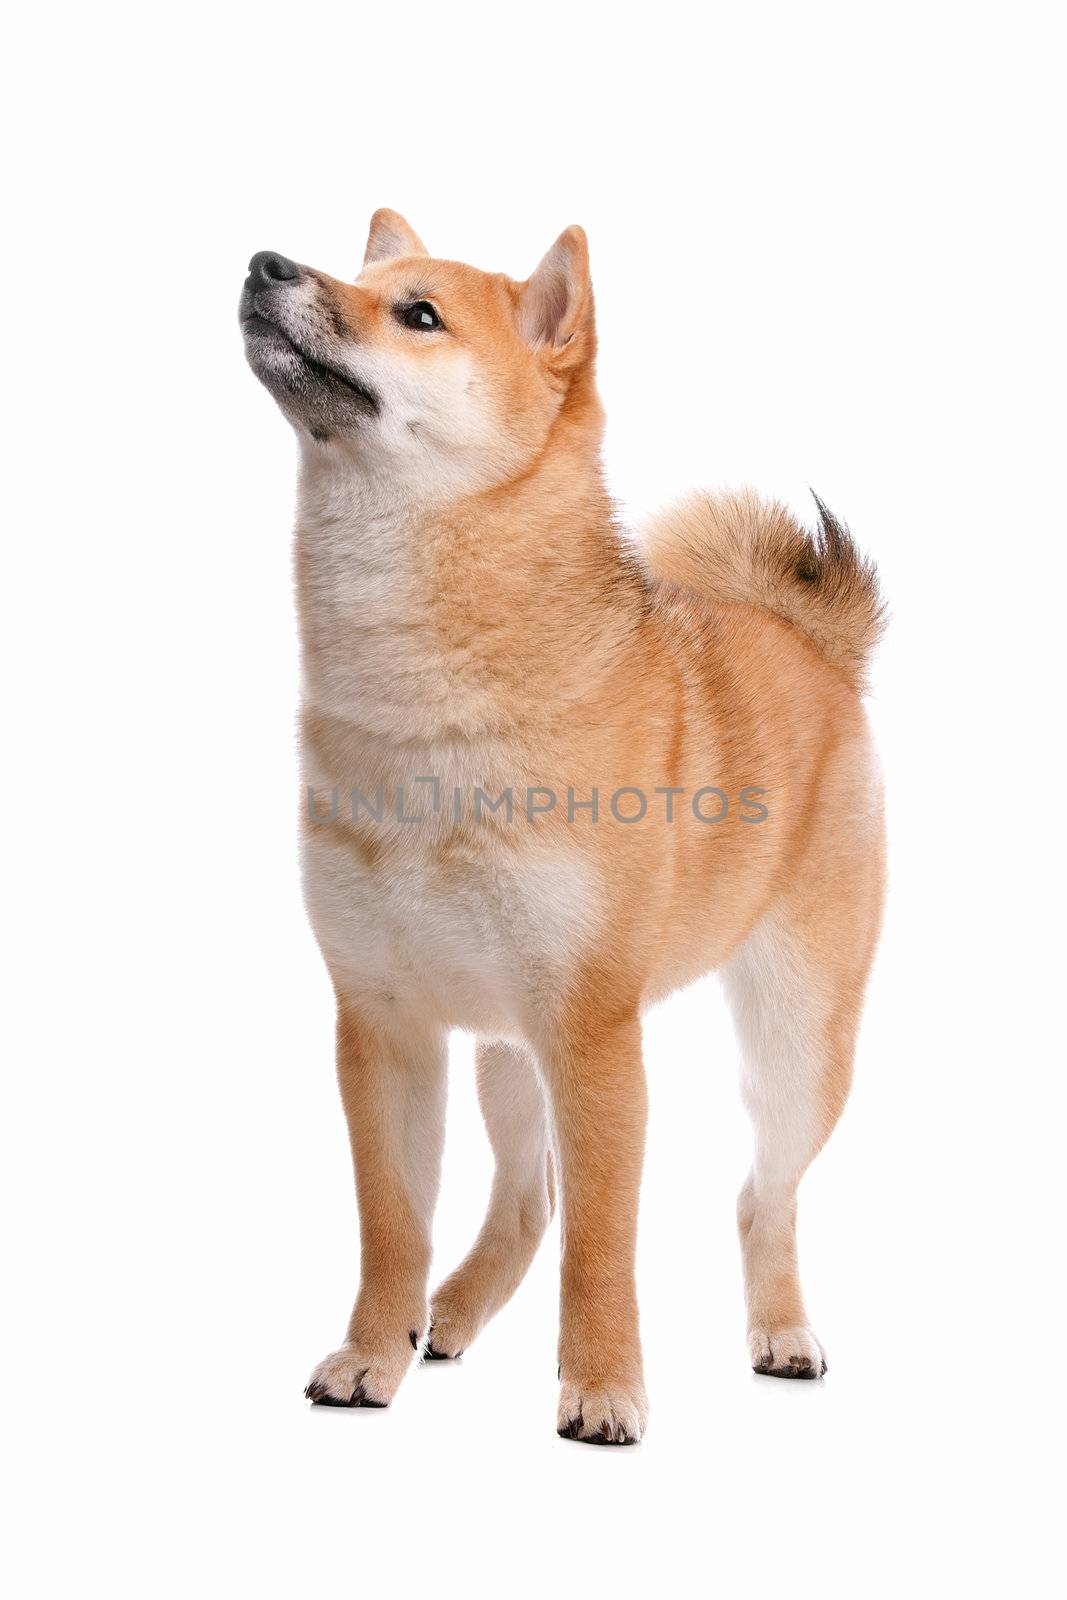 Shiba Inu dog in front of a white background by eriklam